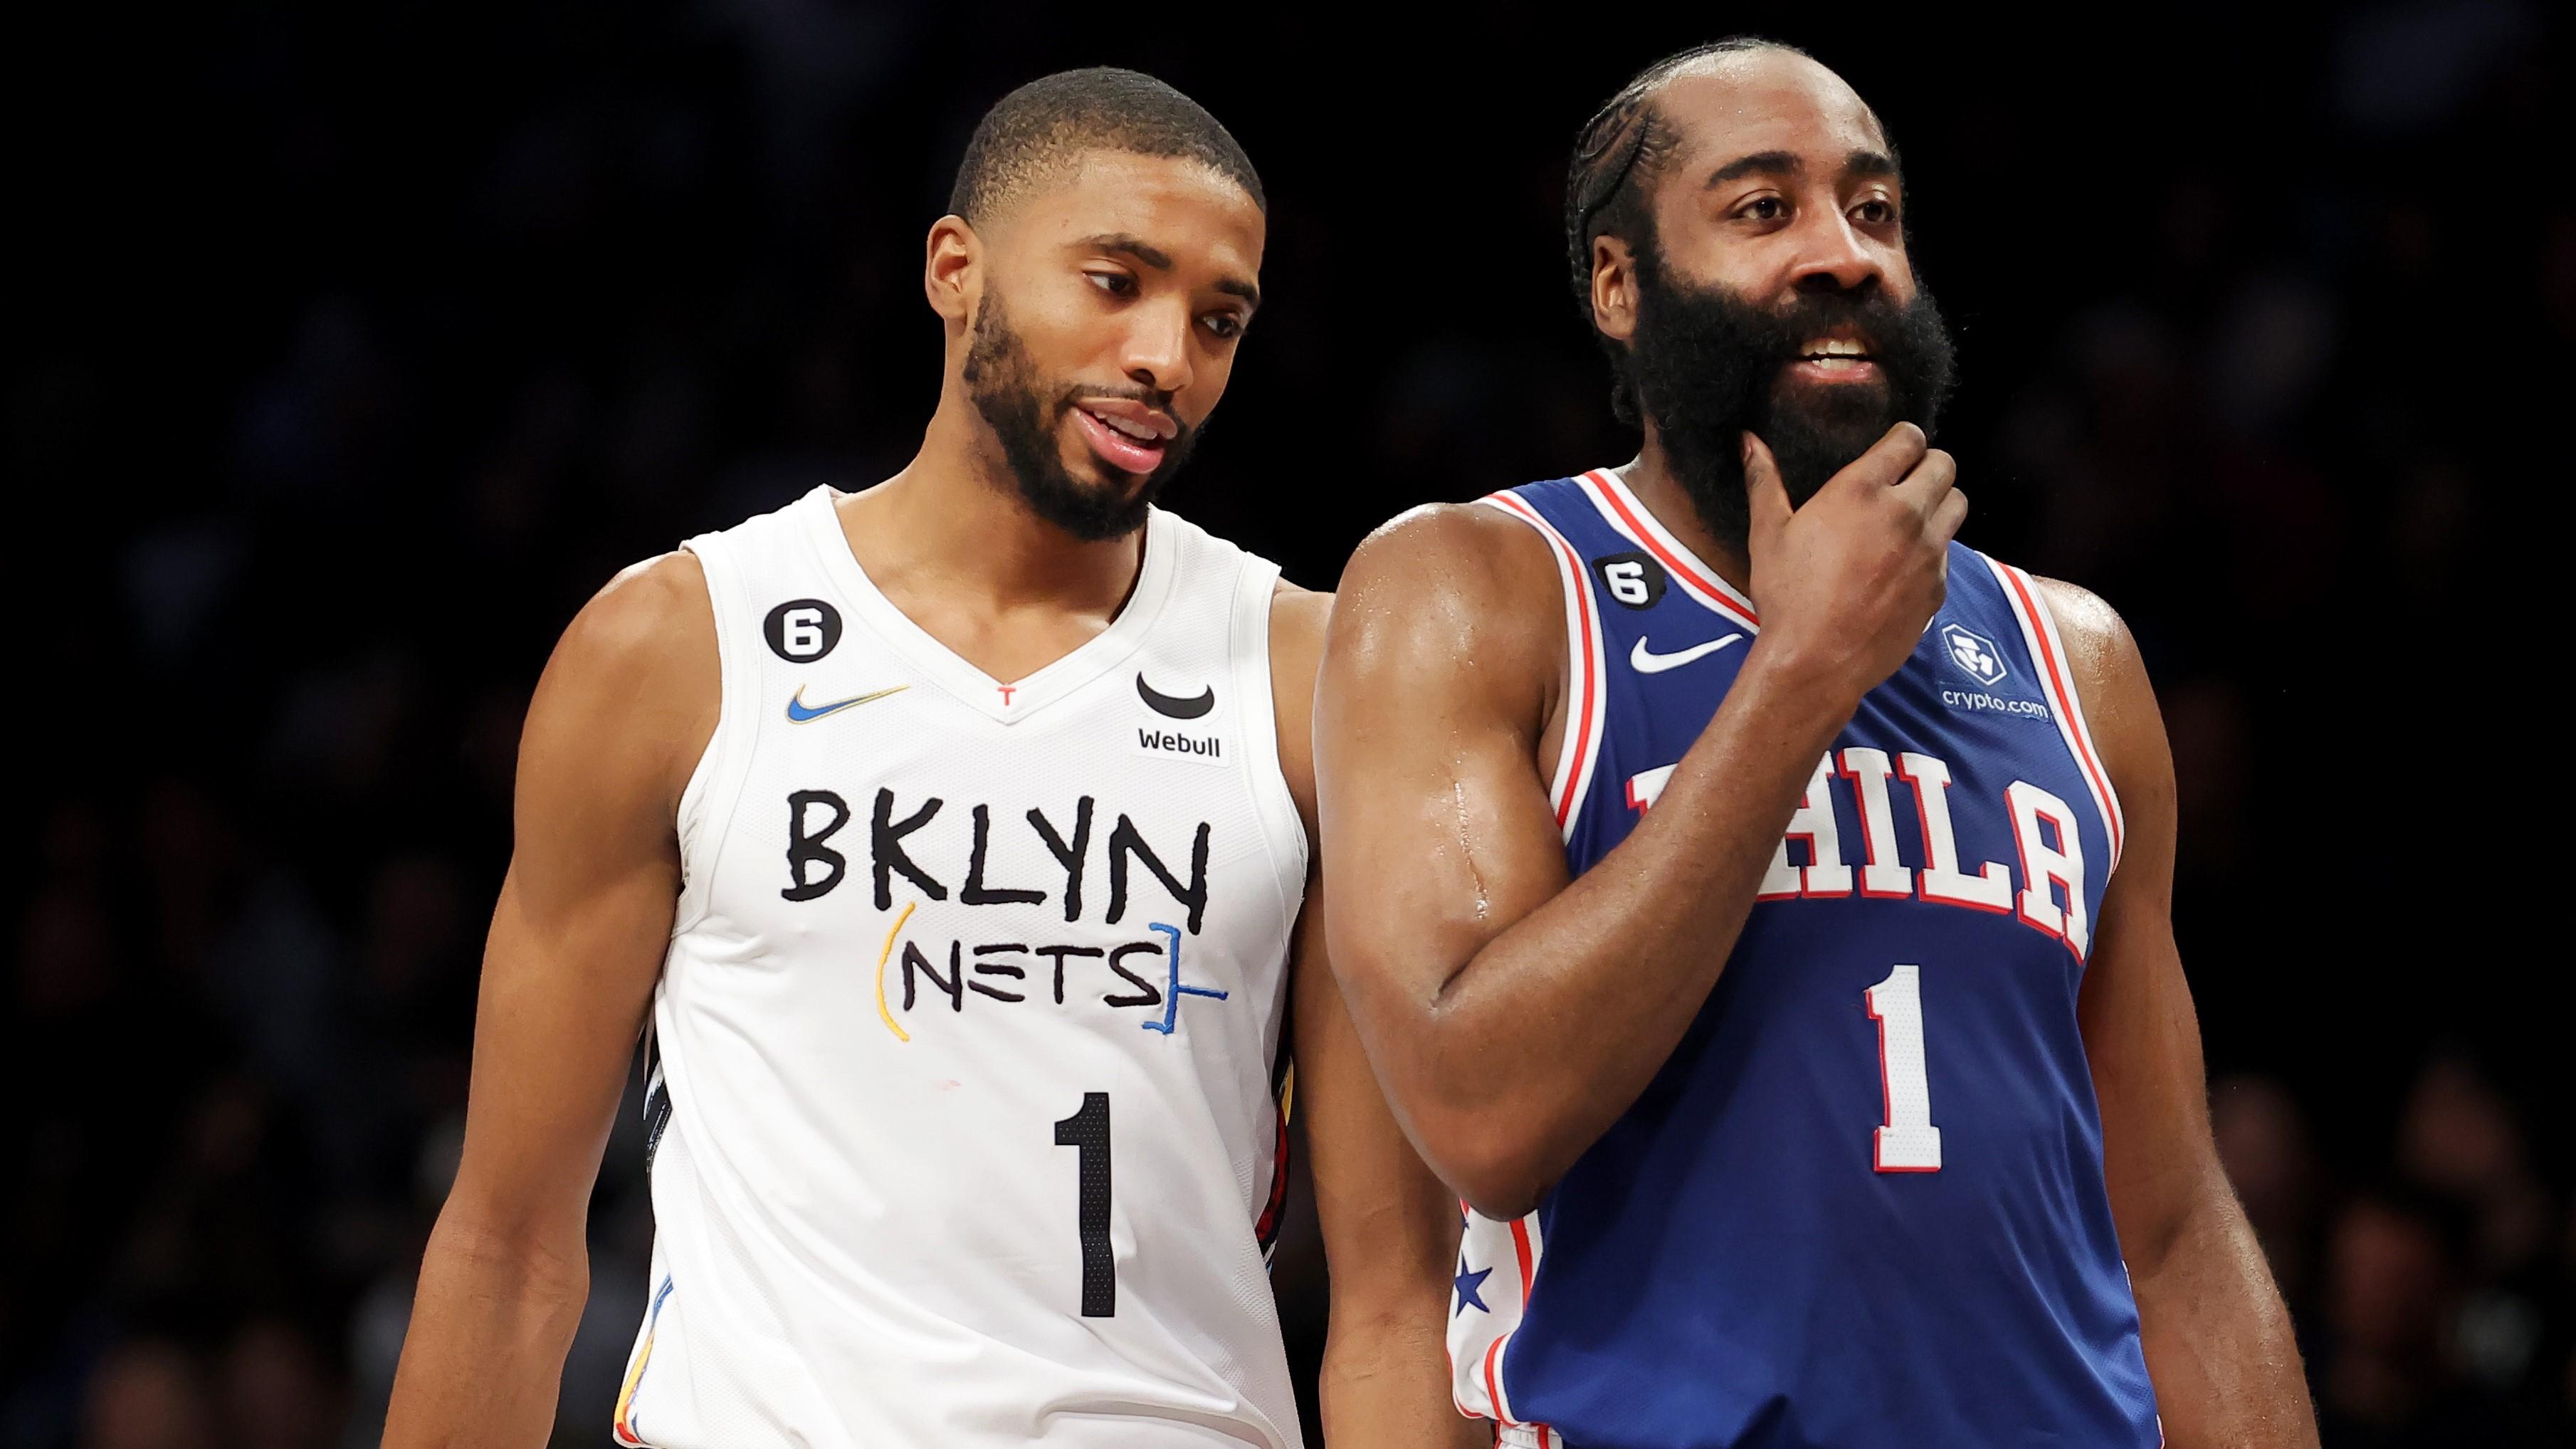 Feb 11, 2023; Brooklyn, New York, USA; Brooklyn Nets forward Mikal Bridges (1) talks to Philadelphia 76ers guard James Harden (1) during a time out during the third quarter at Barclays Center. Mandatory Credit: Brad Penner-USA TODAY Sports / © Brad Penner-USA TODAY Sports